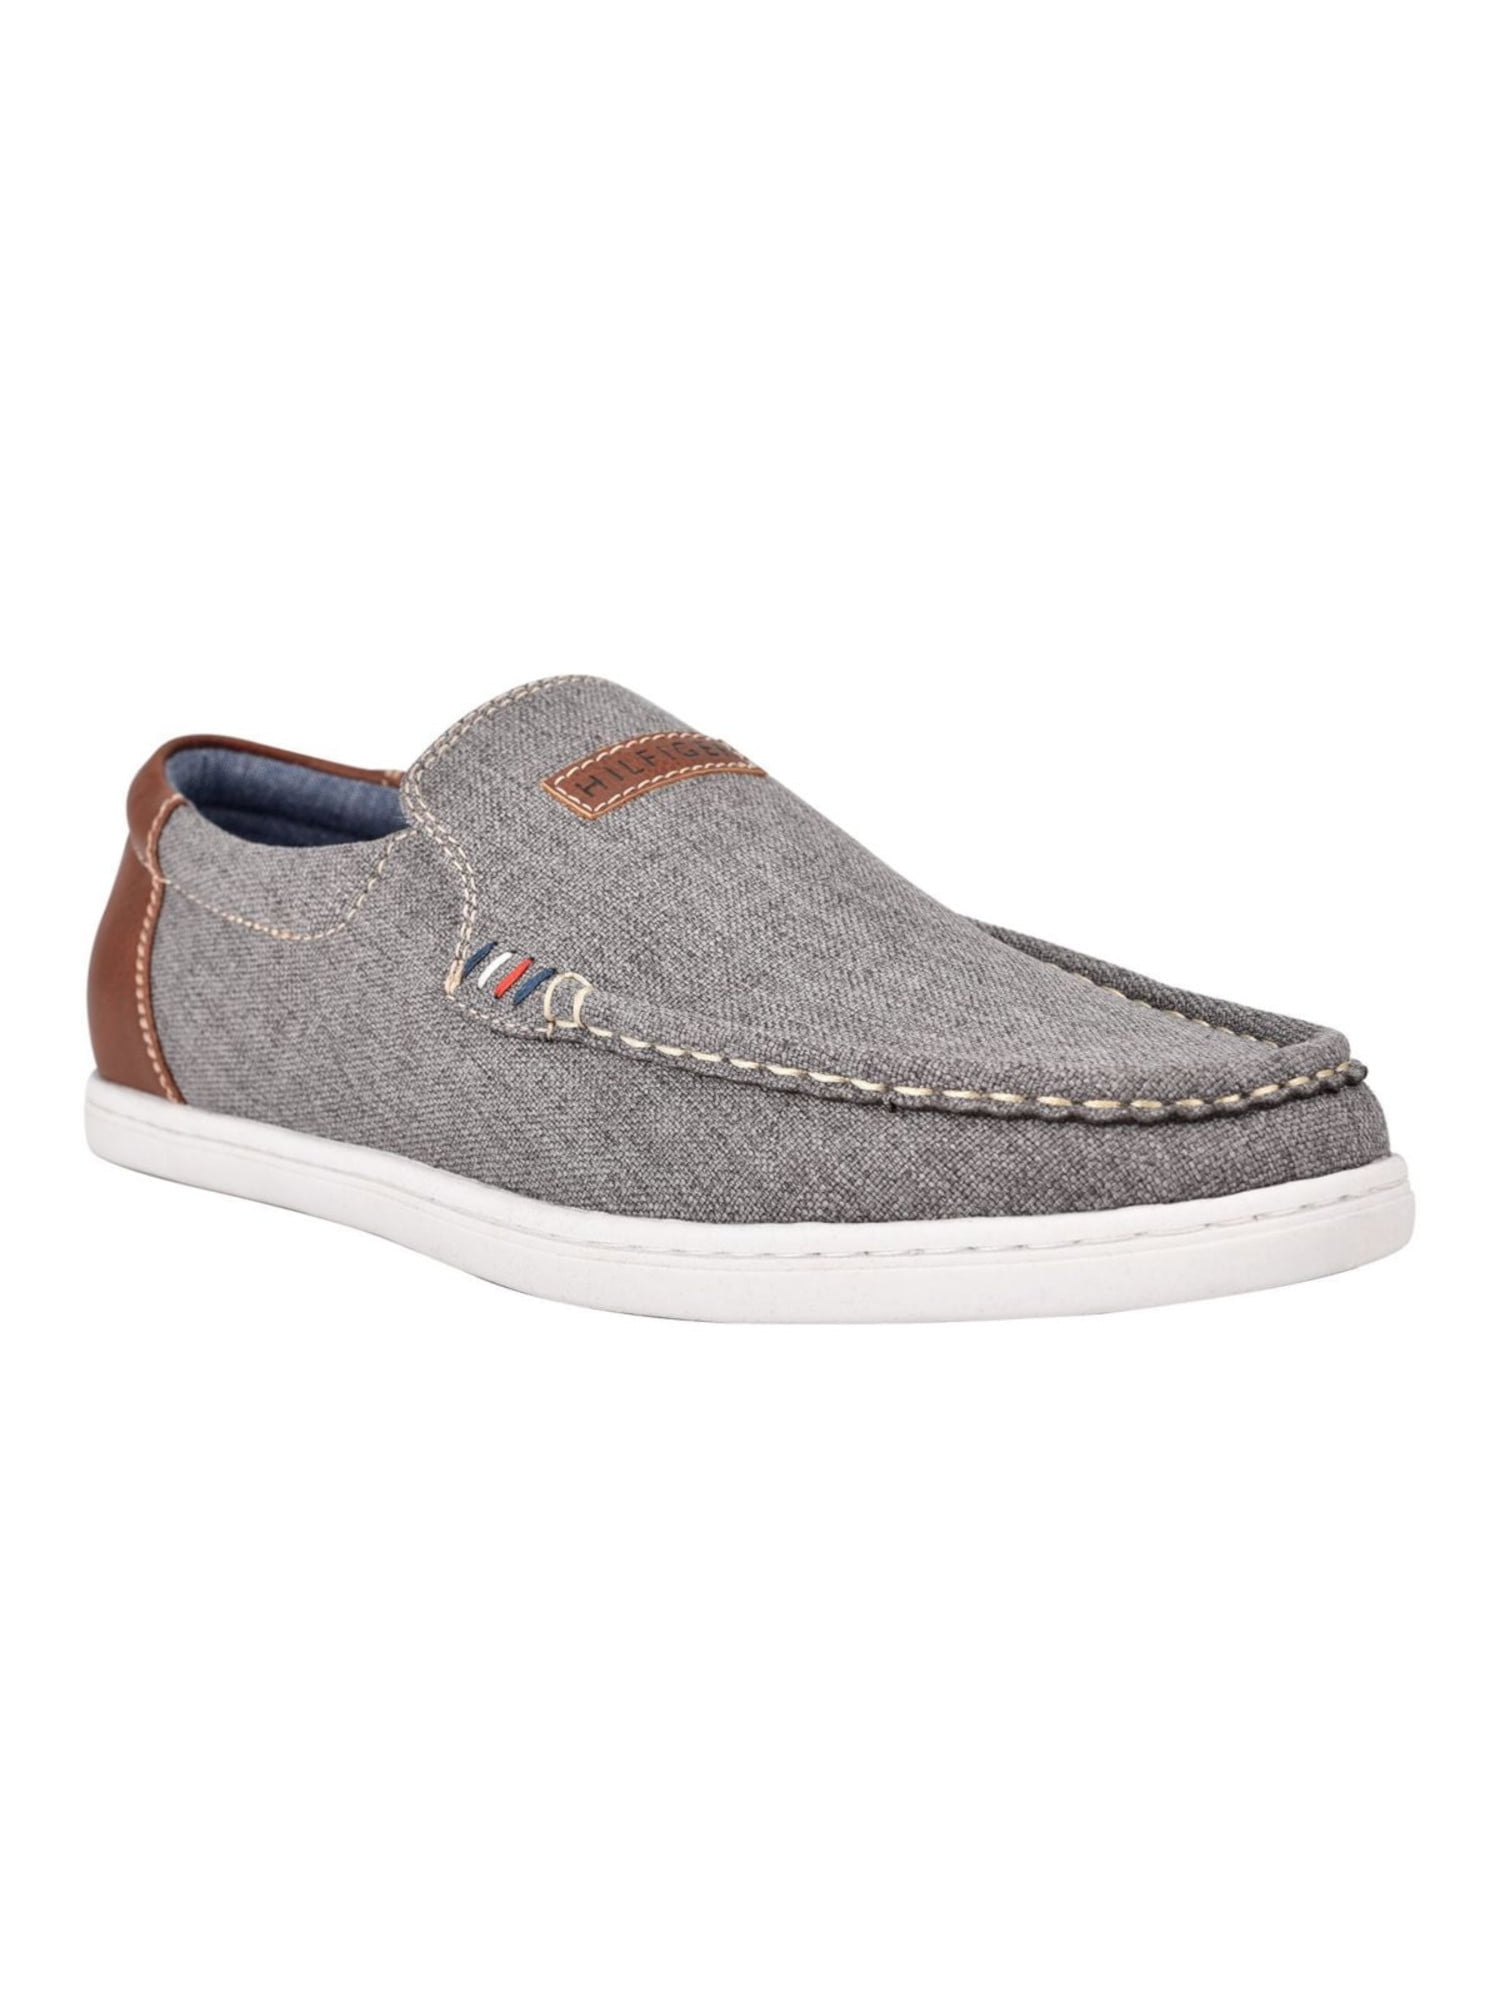 Mens Tommy Hilfiger Aniper Casual Shoe - Light Gray